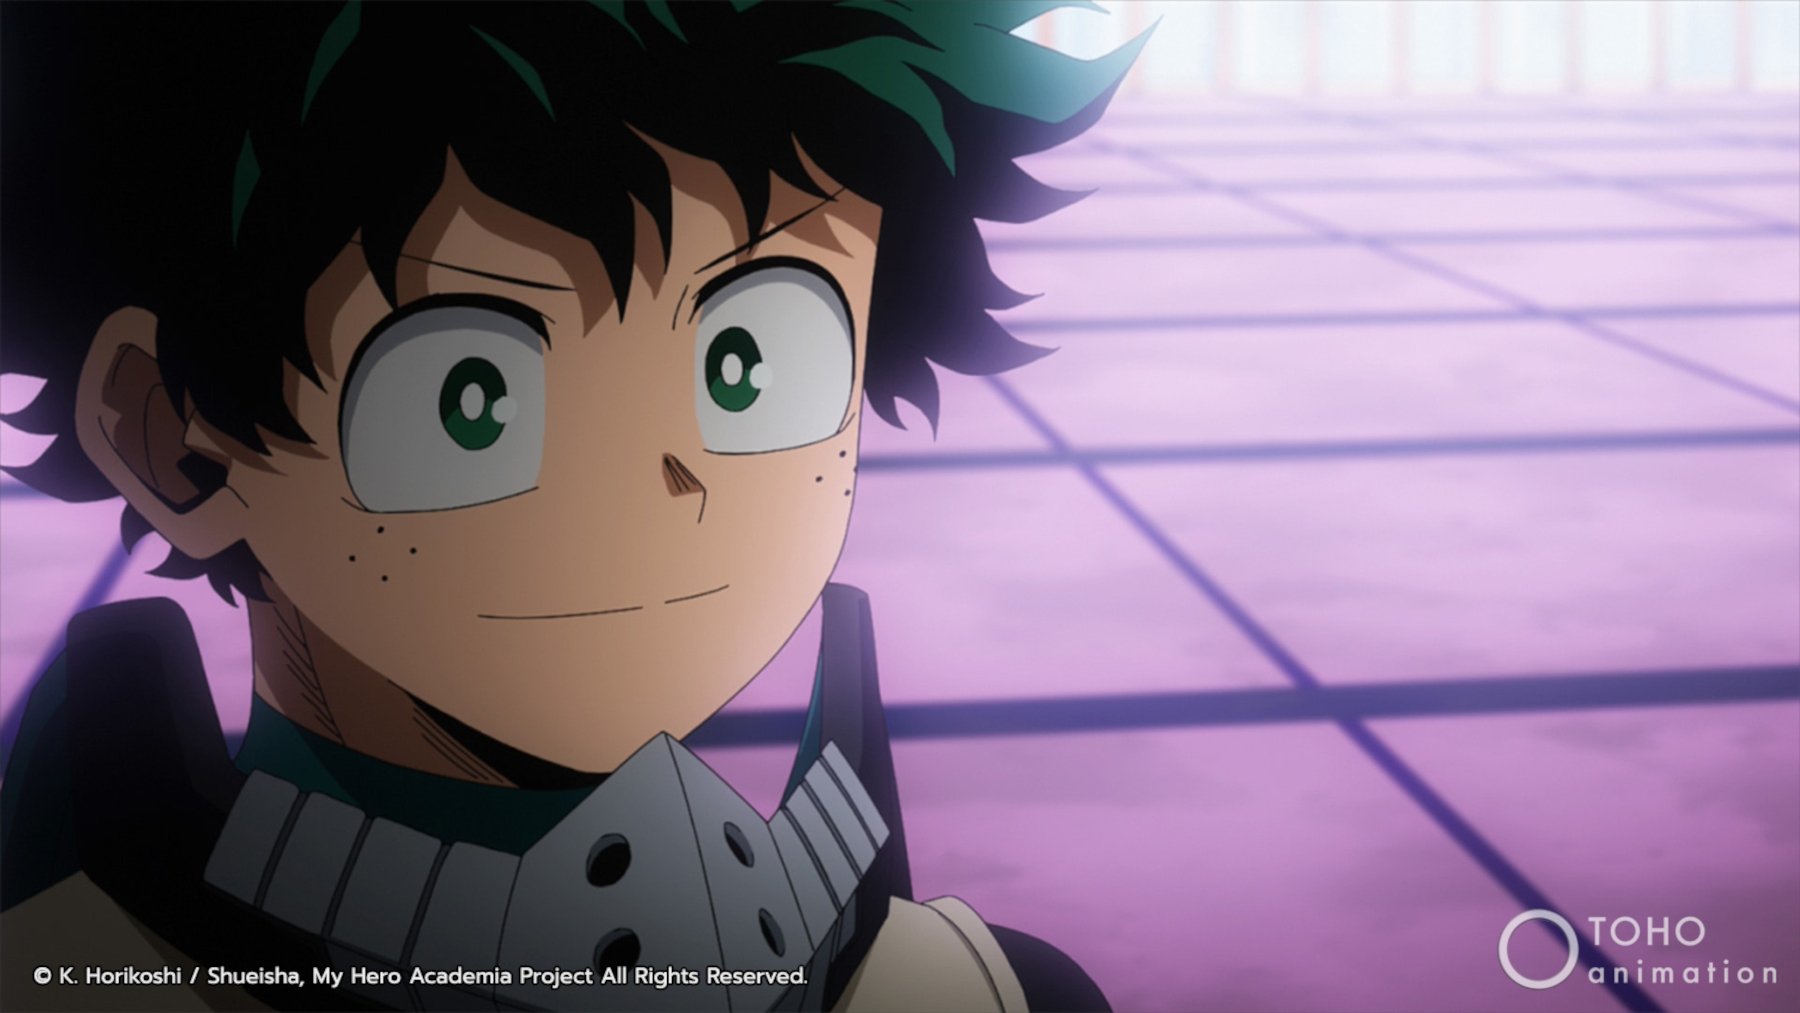 ‘My Hero Academia’: Did Deku’s Doctor Steal His Quirk? Some Fans Think So